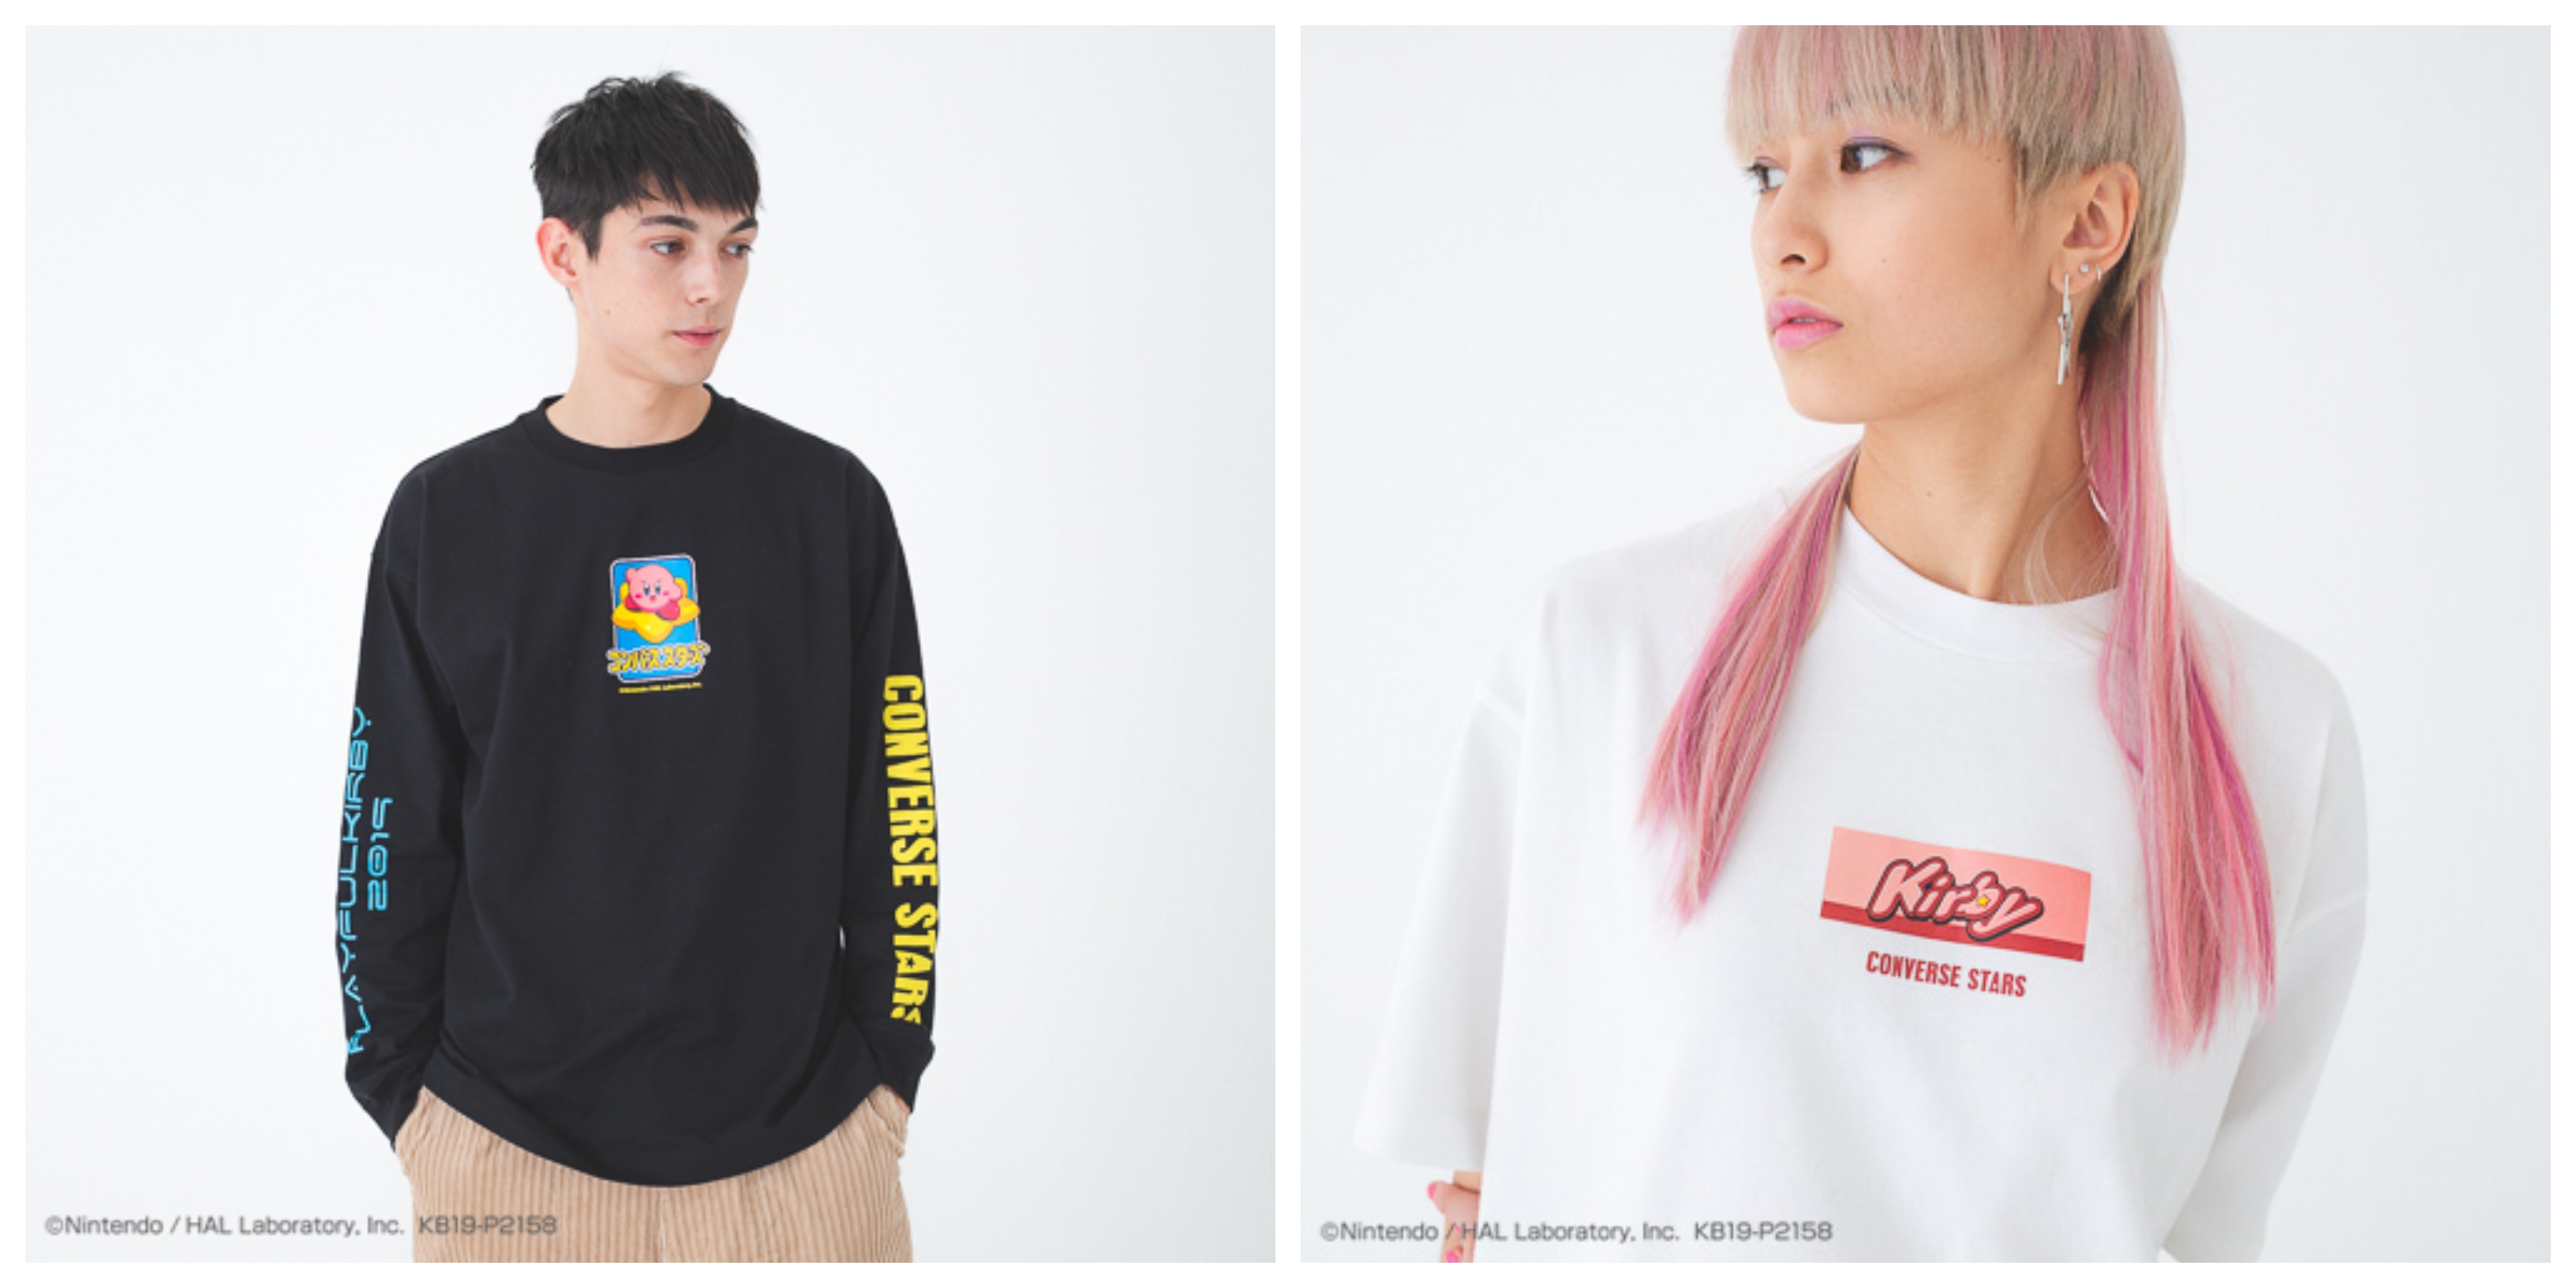 Get a “playful” look with the new Kirby clothing collaboration ...